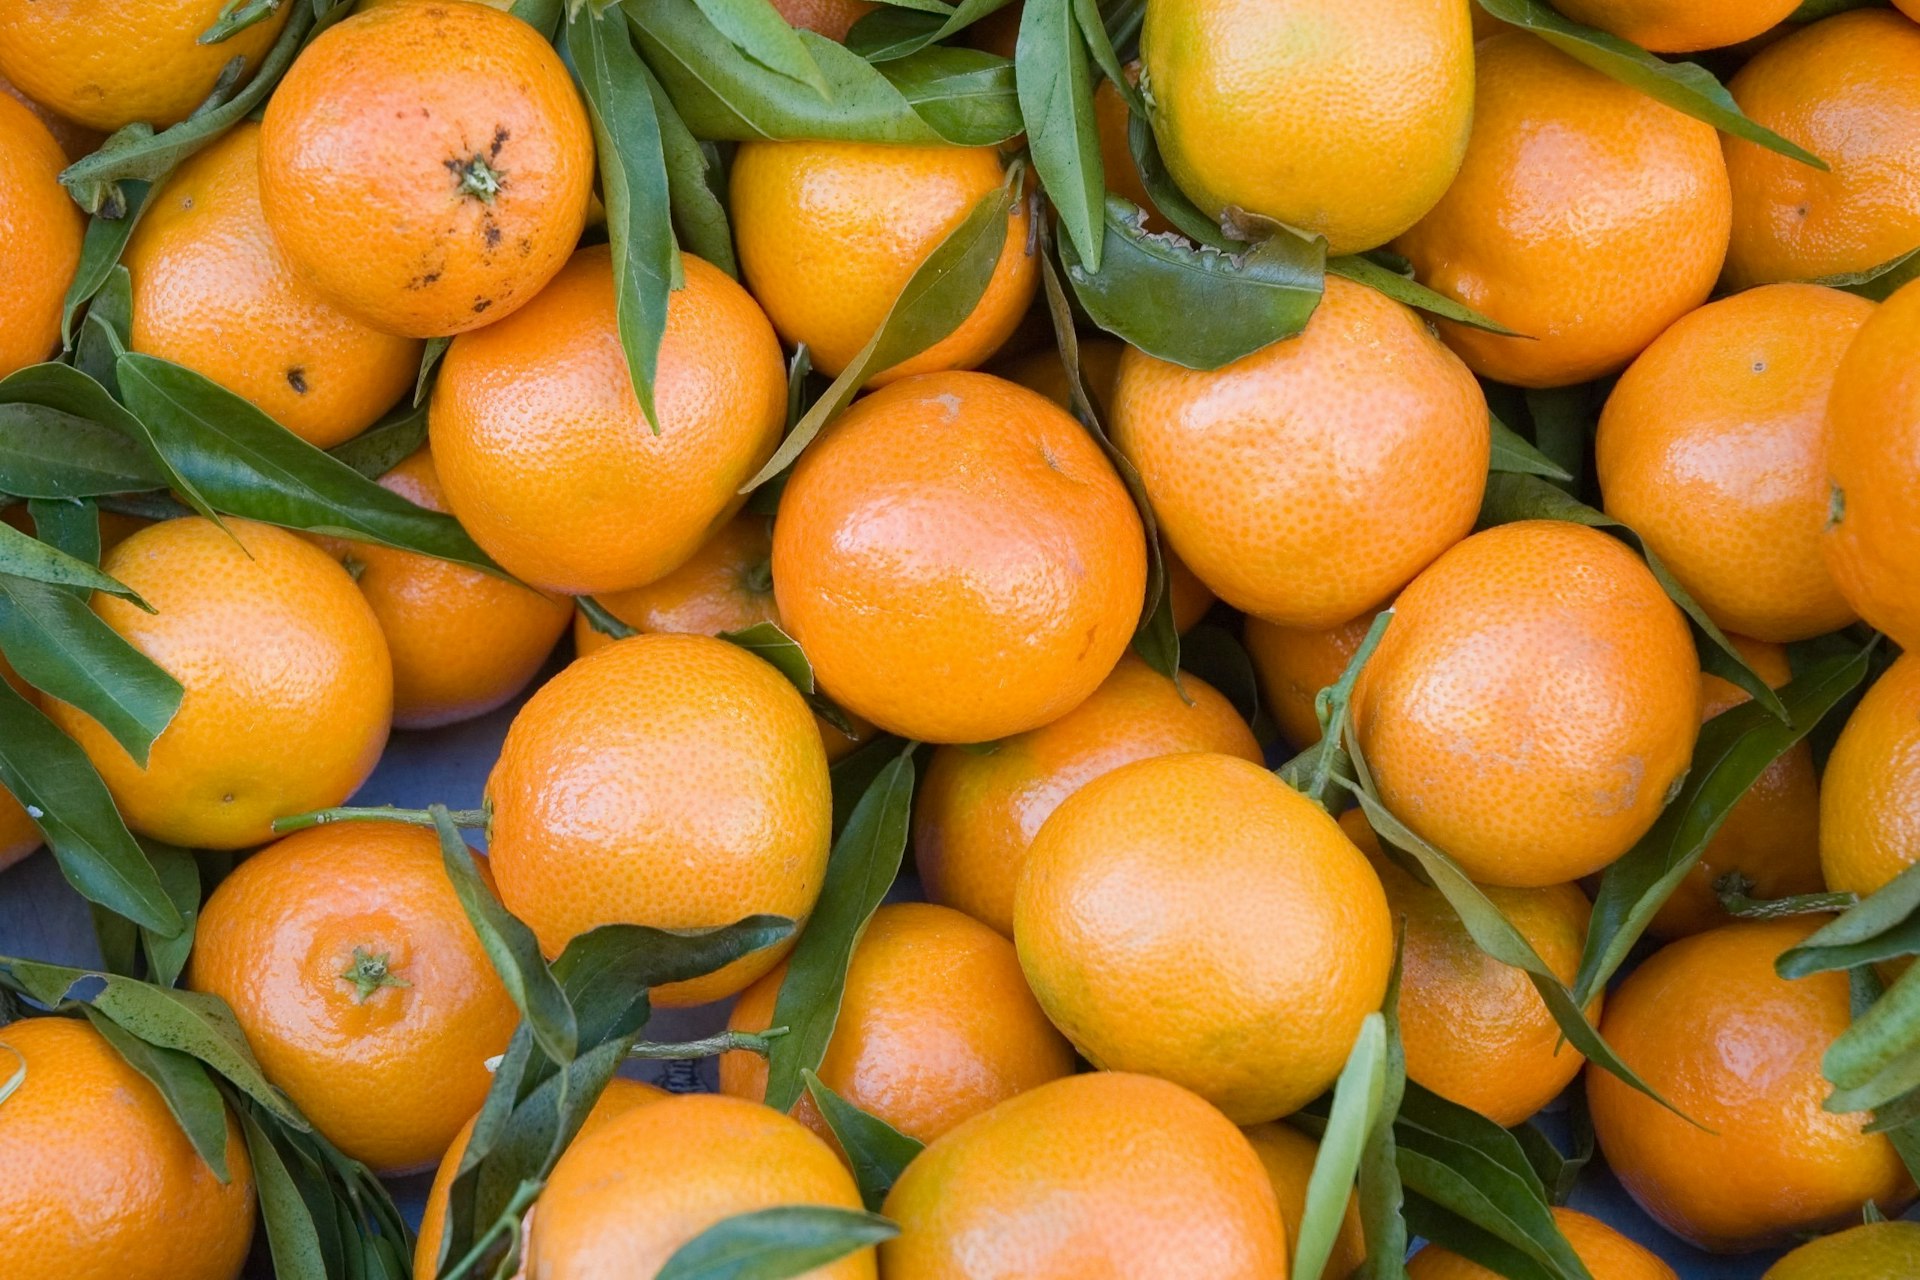 California's dirty little secret: What's in the water used to grow your all-American fruit?